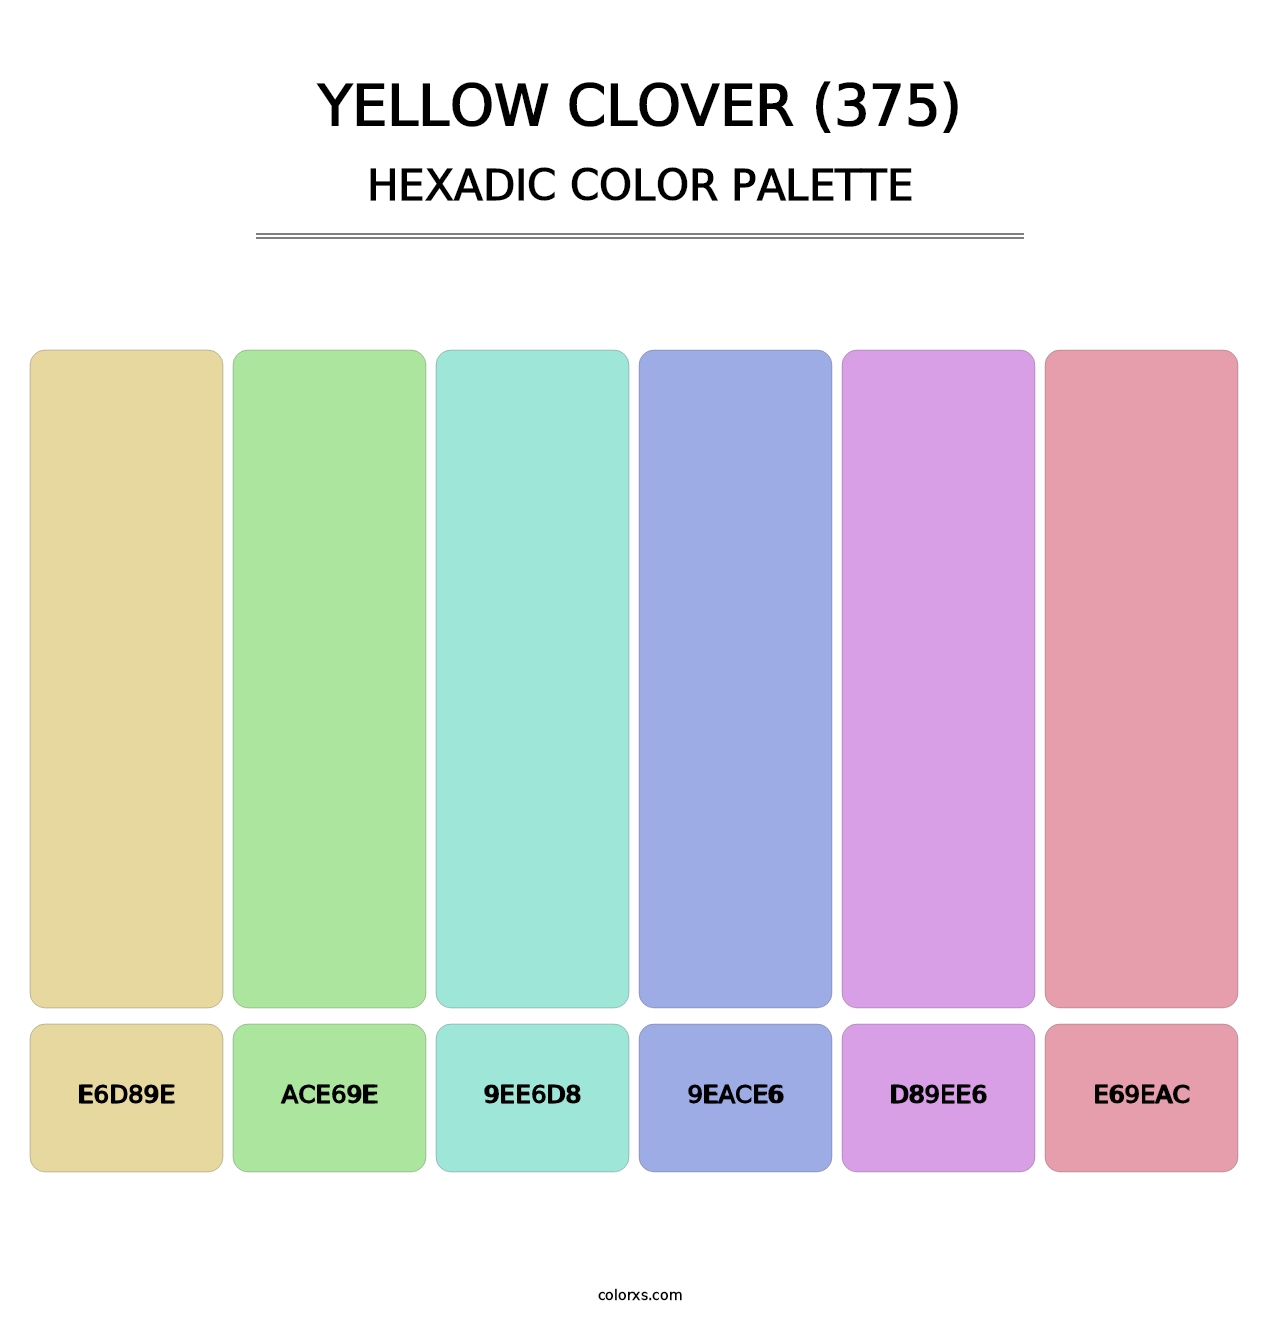 Yellow Clover (375) - Hexadic Color Palette